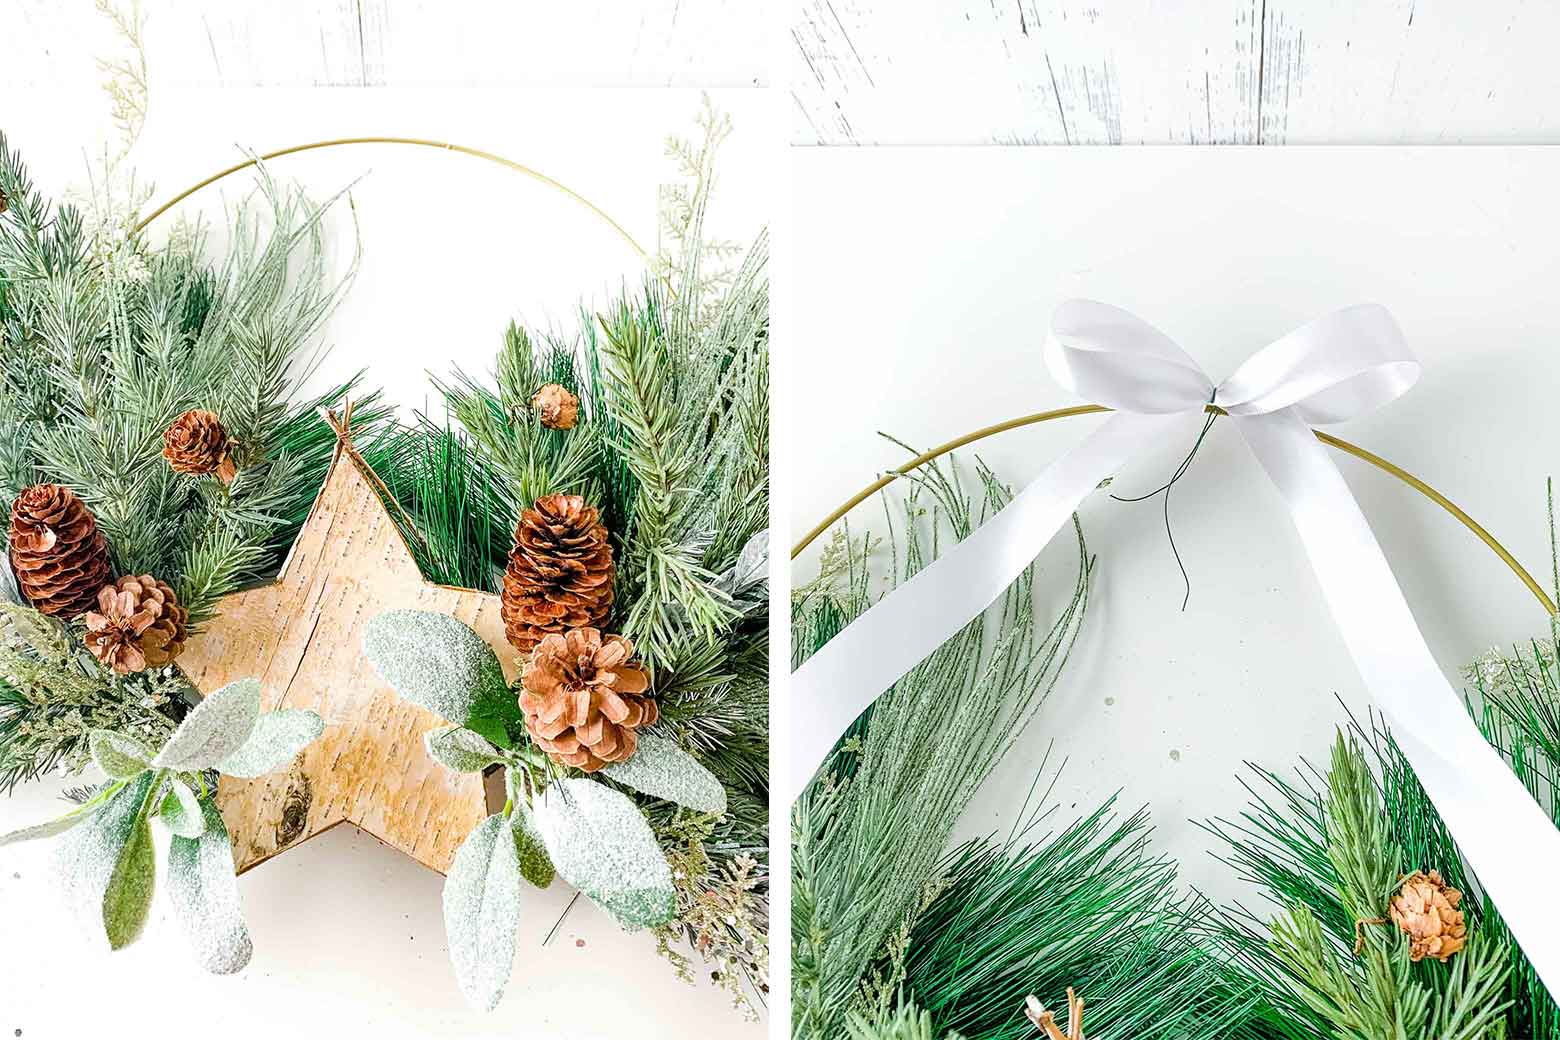 hot glueing a birch bark star and placing a ribbon on a wreath